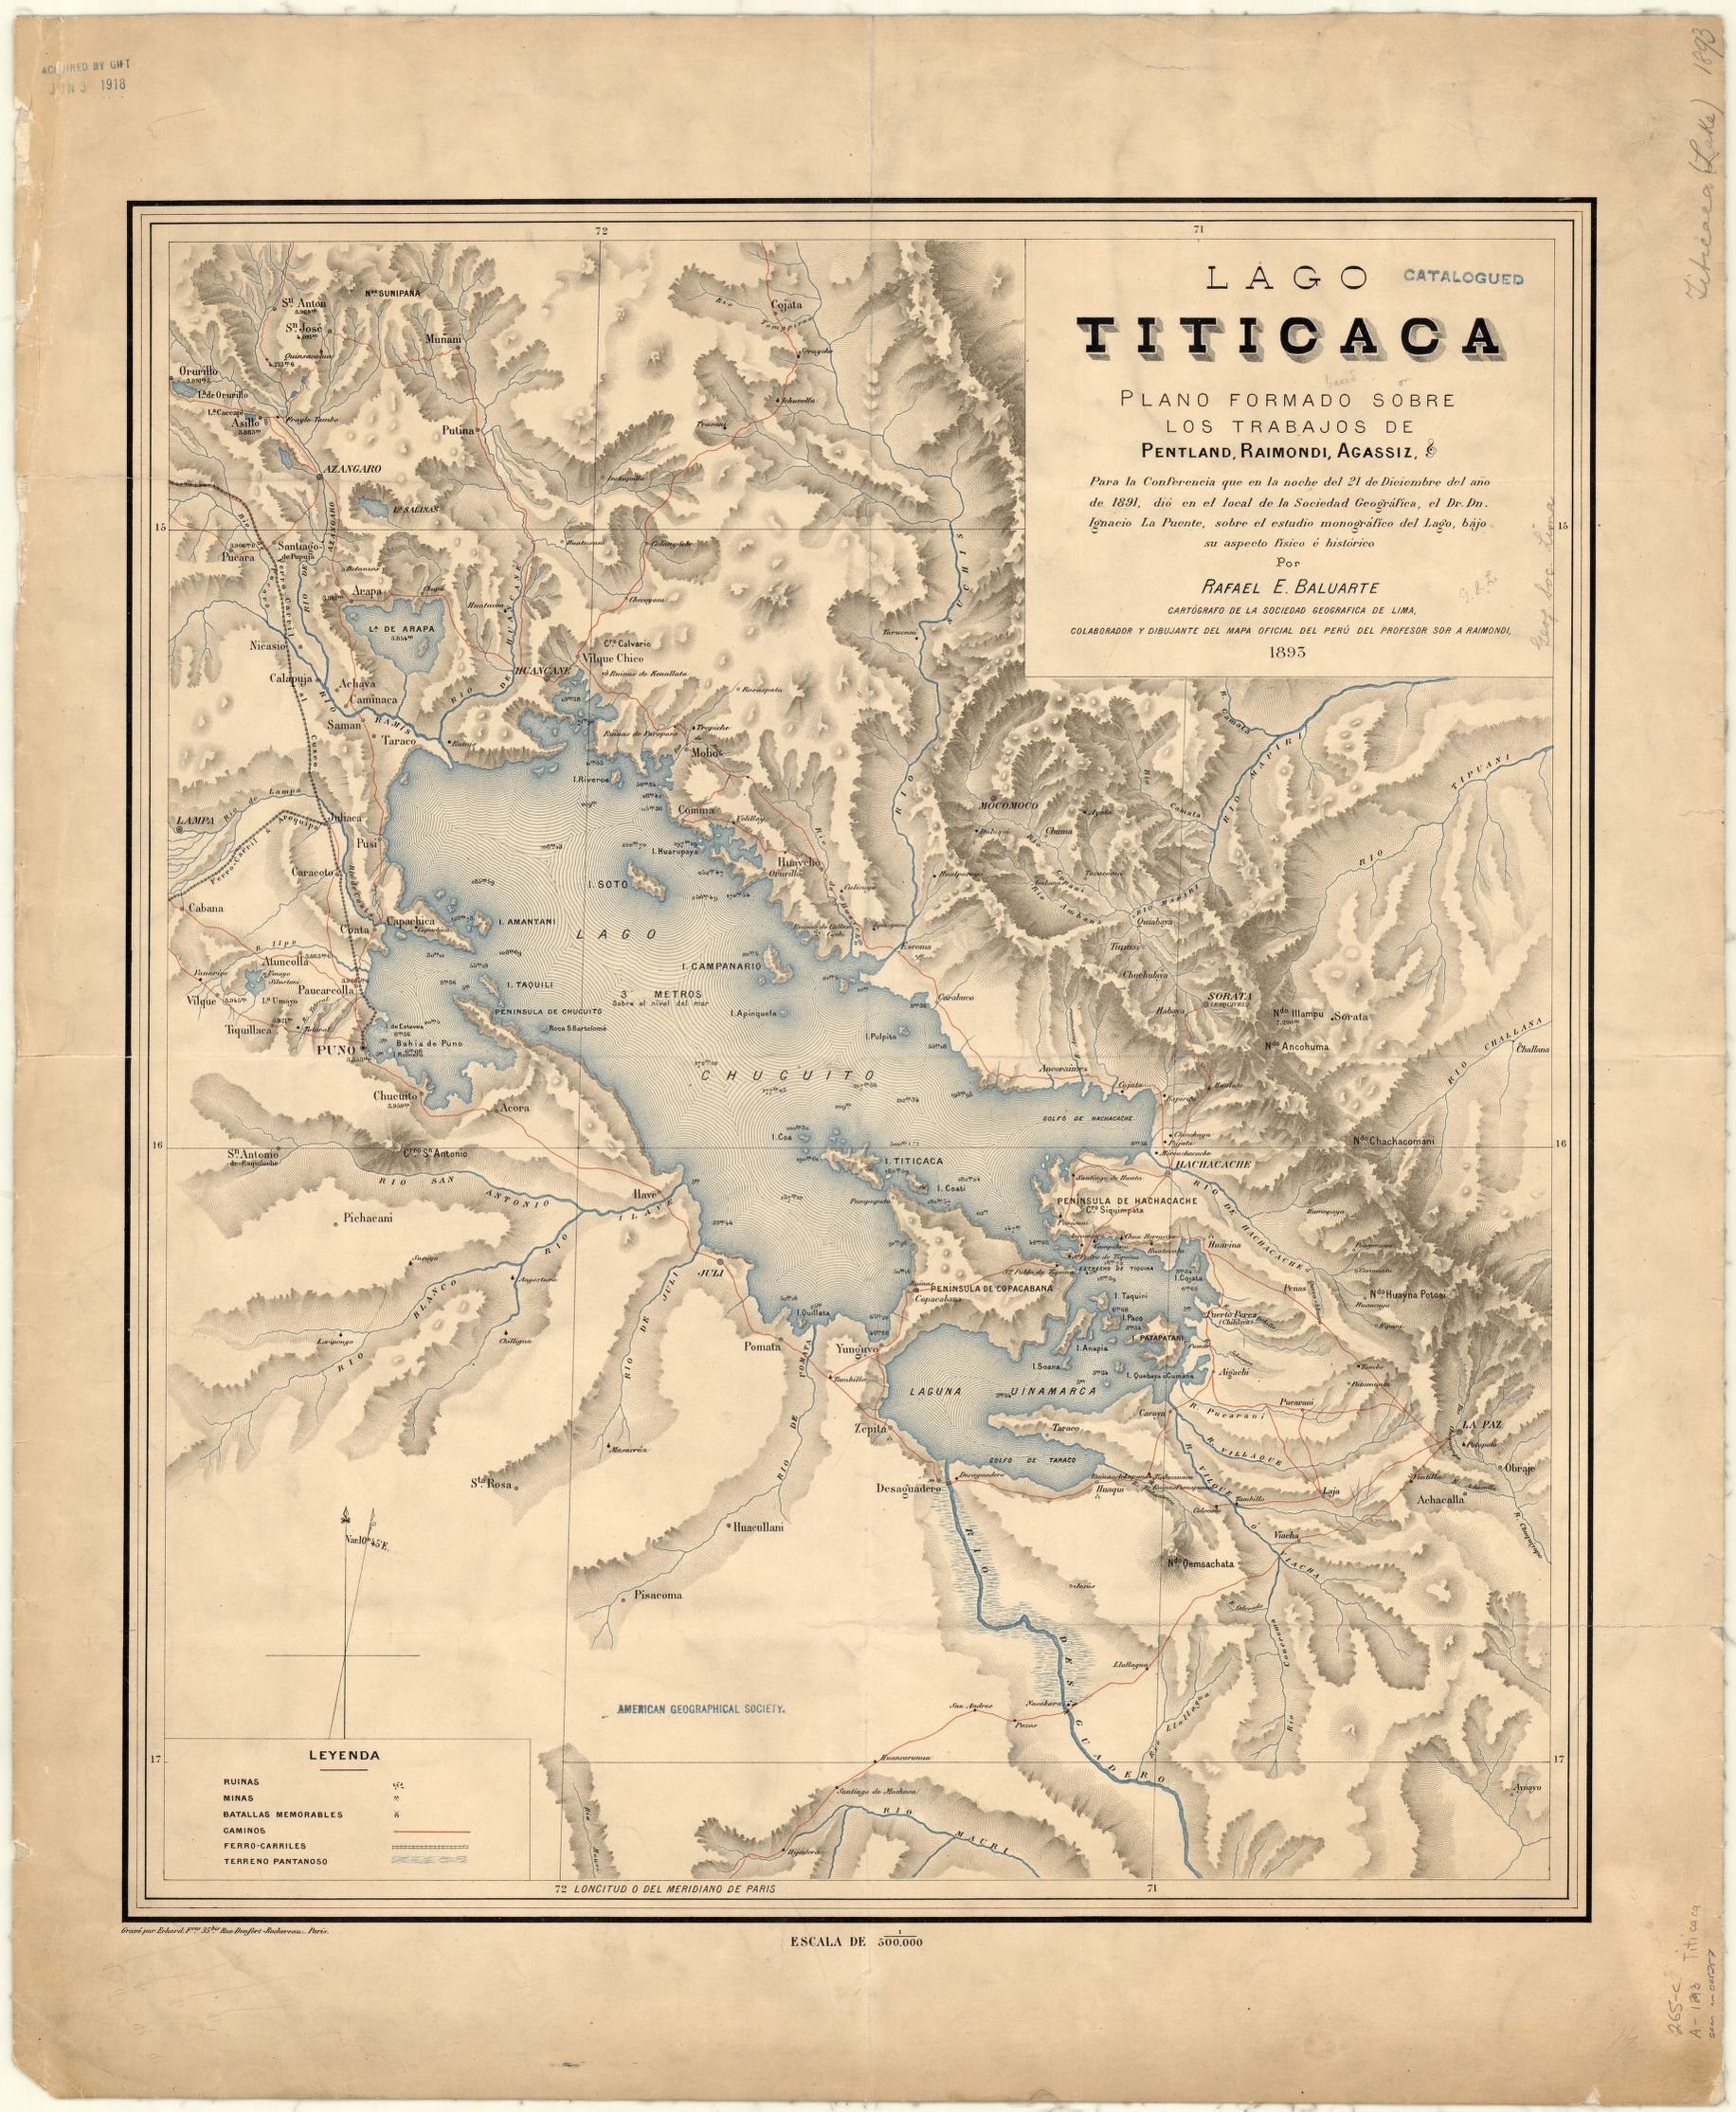  “This map of Lake Titicaca was made by Rafael E. Baluarte, cartographer of the Geographical Society of Lima, for a presentation to the society in December 1891 of a monographic study of the lake by Dr. Ignacio La Puente.”  From the Library of Congre